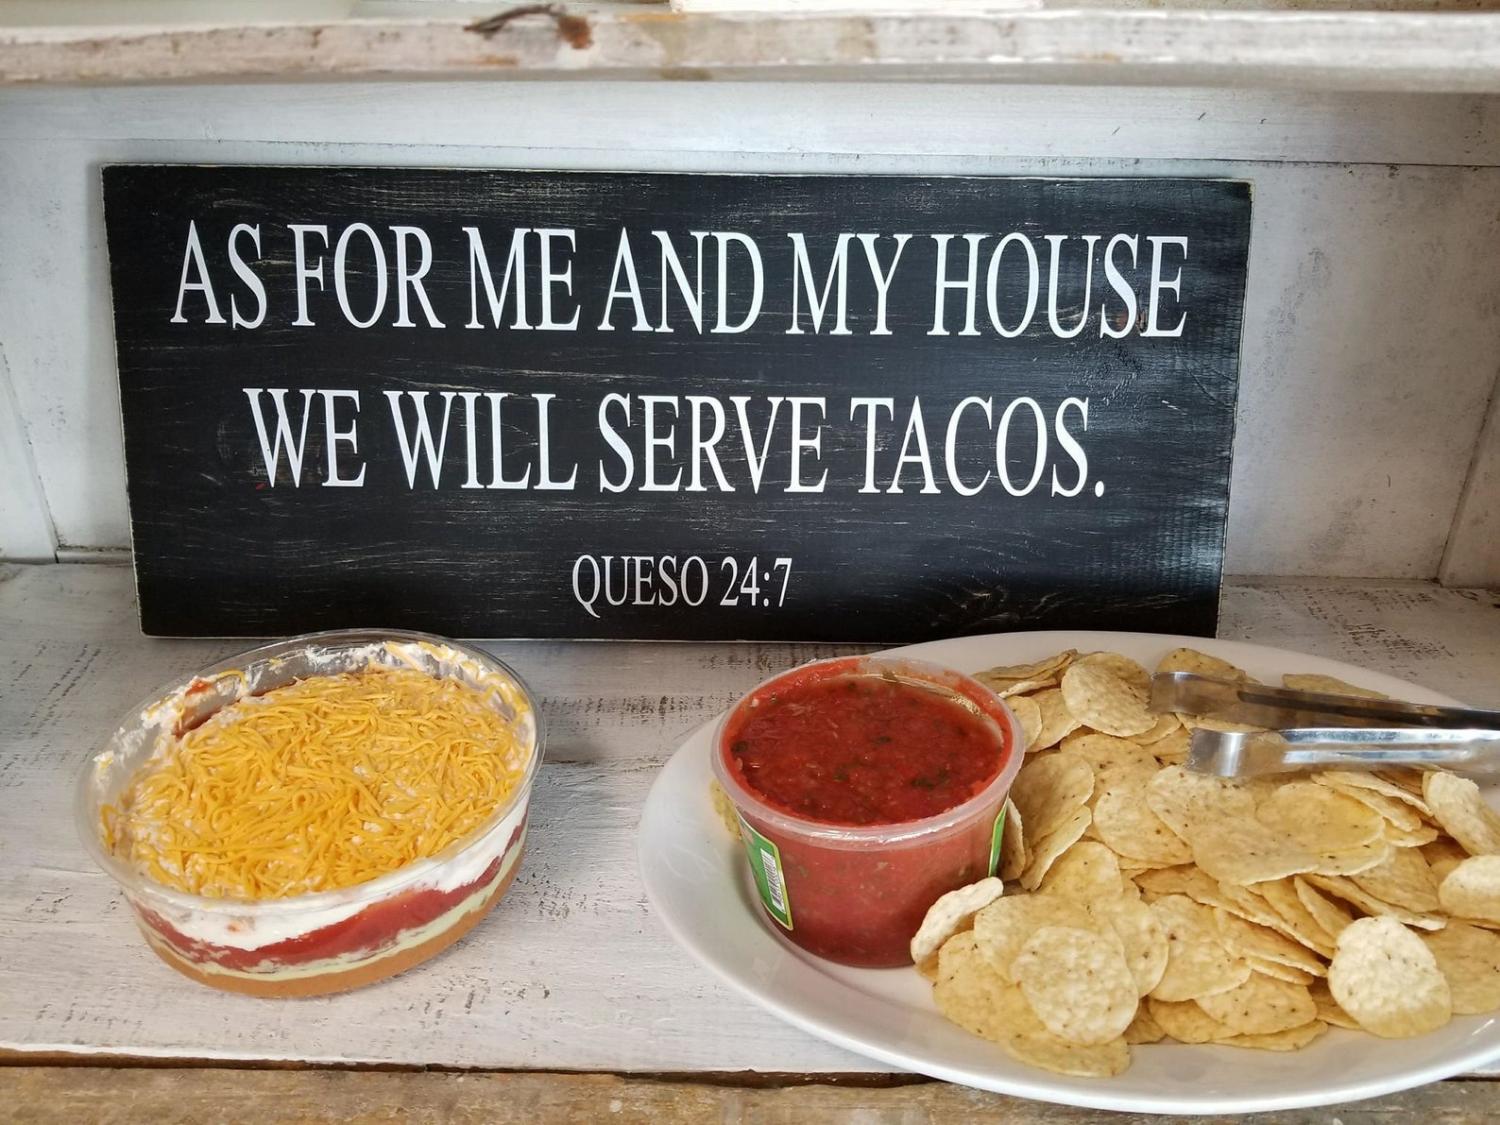 As For Me and My House We Will Serve Tacos - Queso 24:7